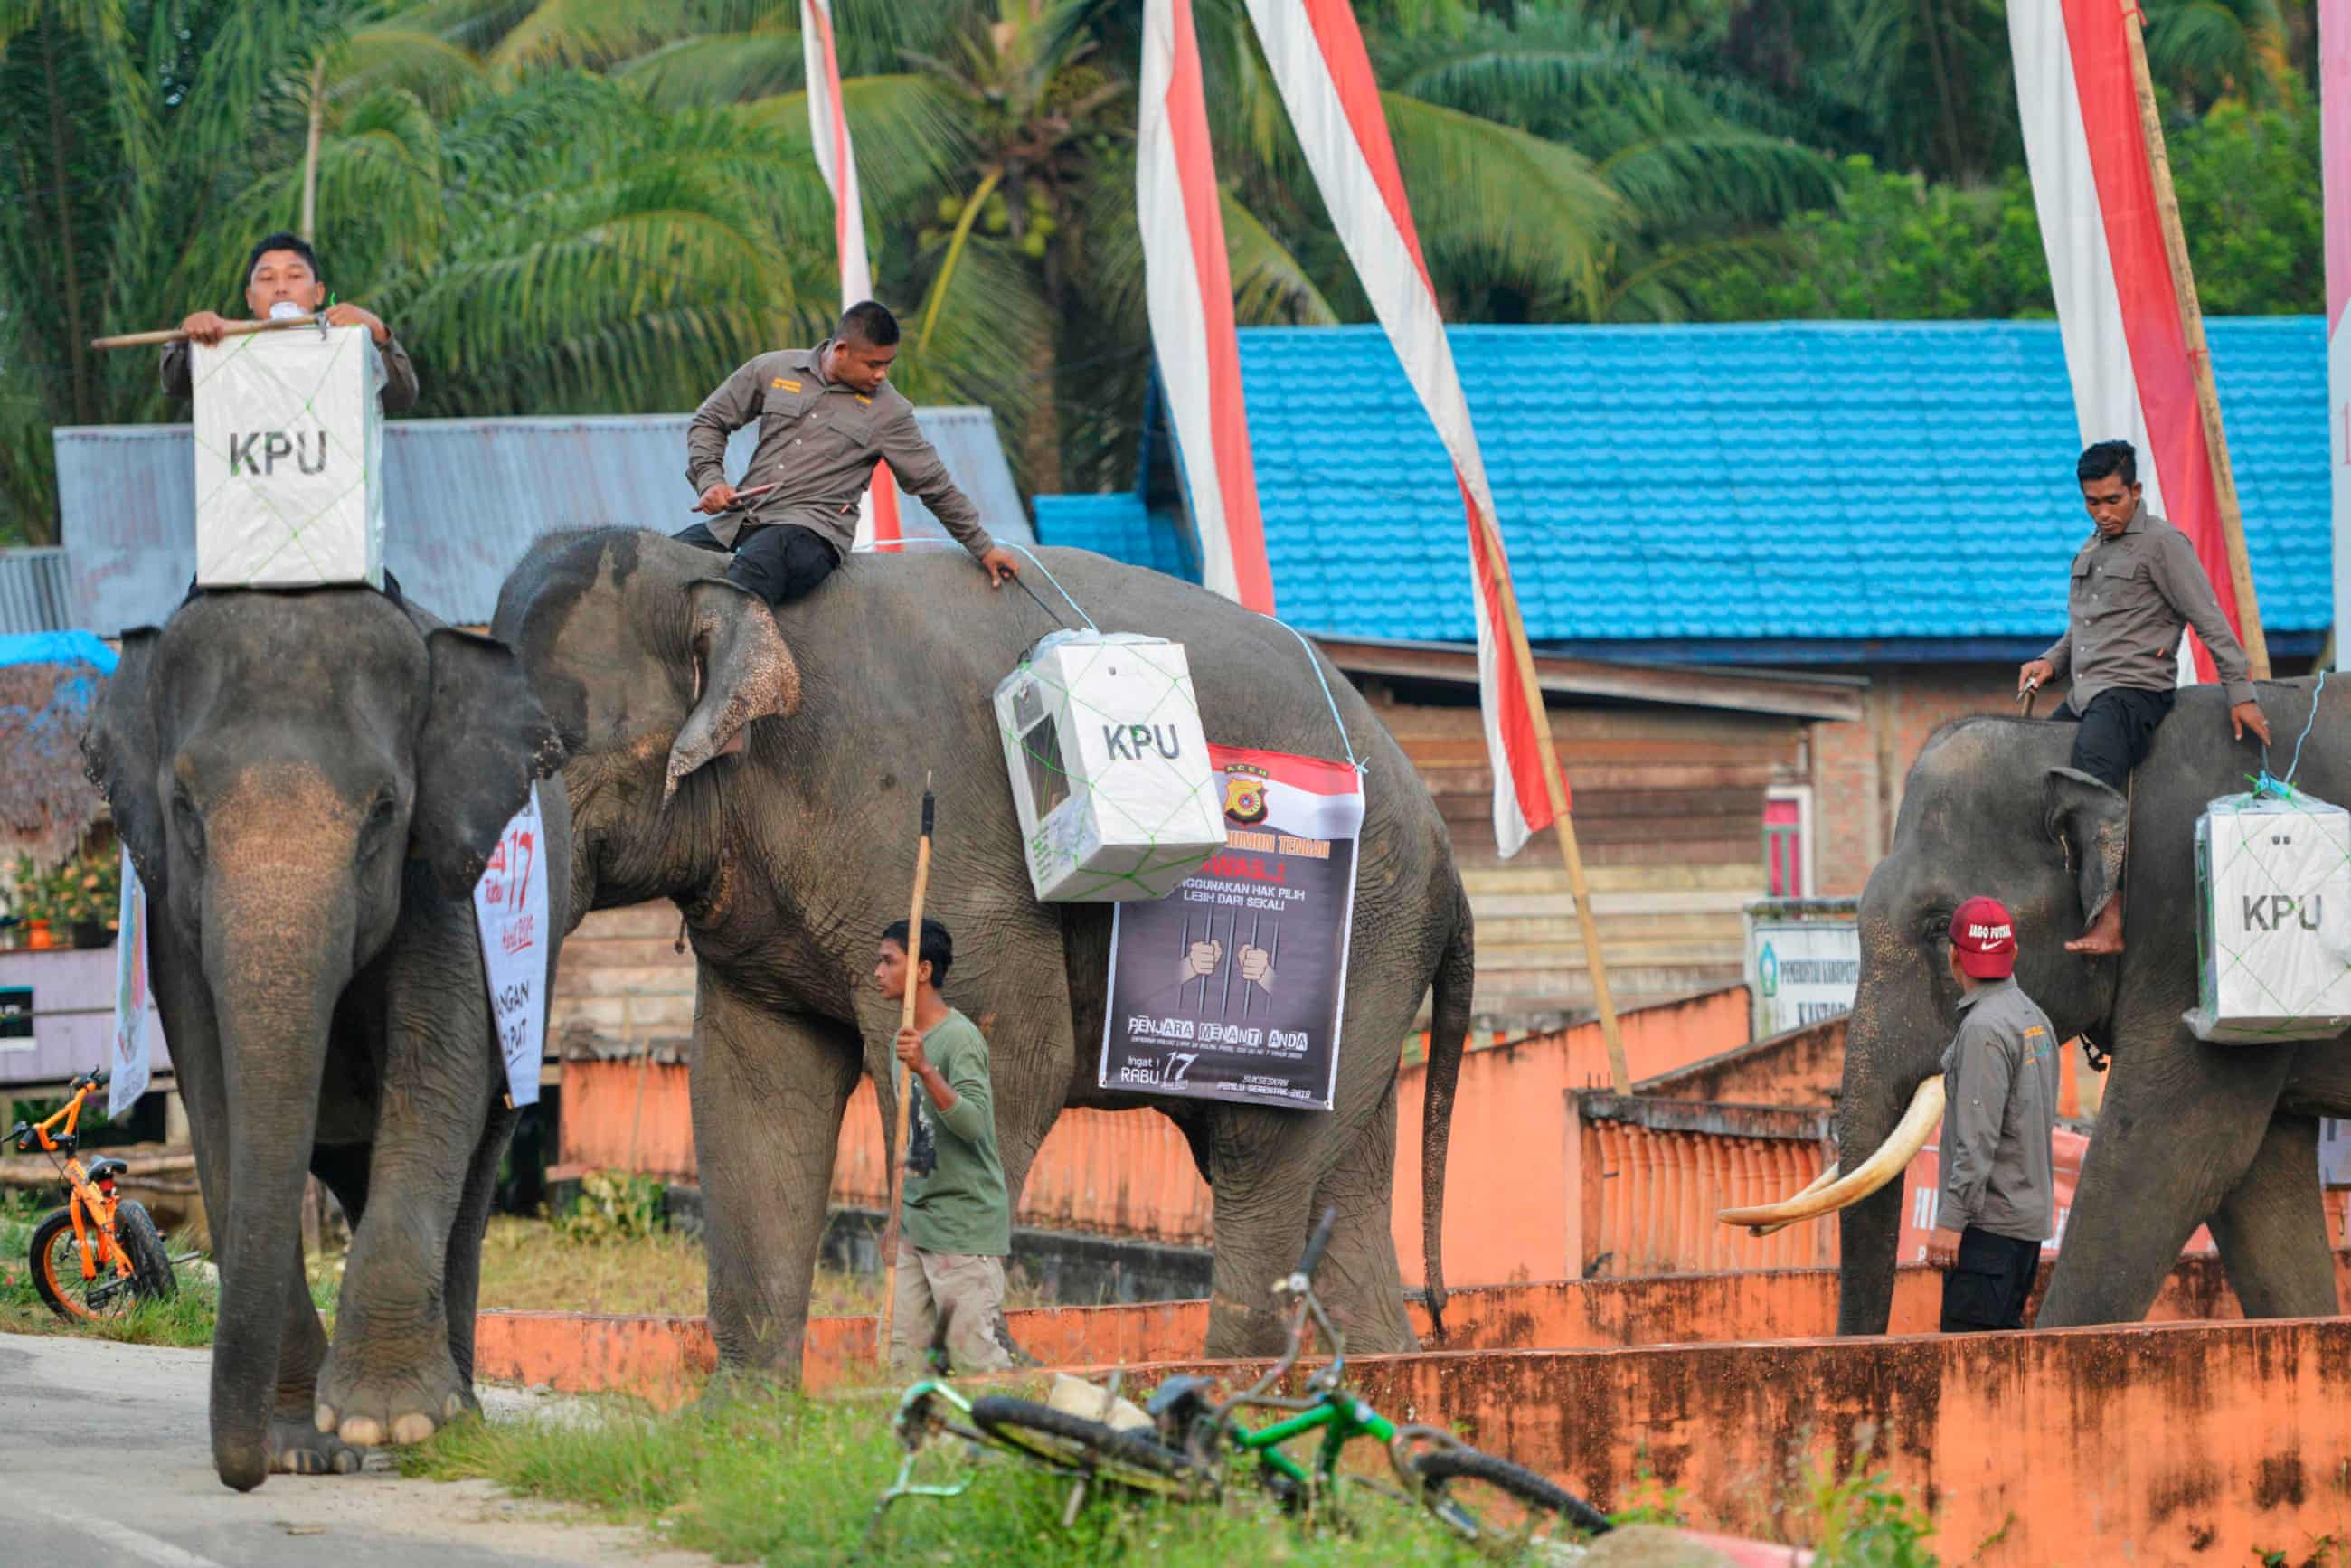 Photos Of Indonesian Election Workers Riding Elephants &Amp; Crossing Rivers To Deliver Ballot Boxes Go Viral - World Of Buzz 3